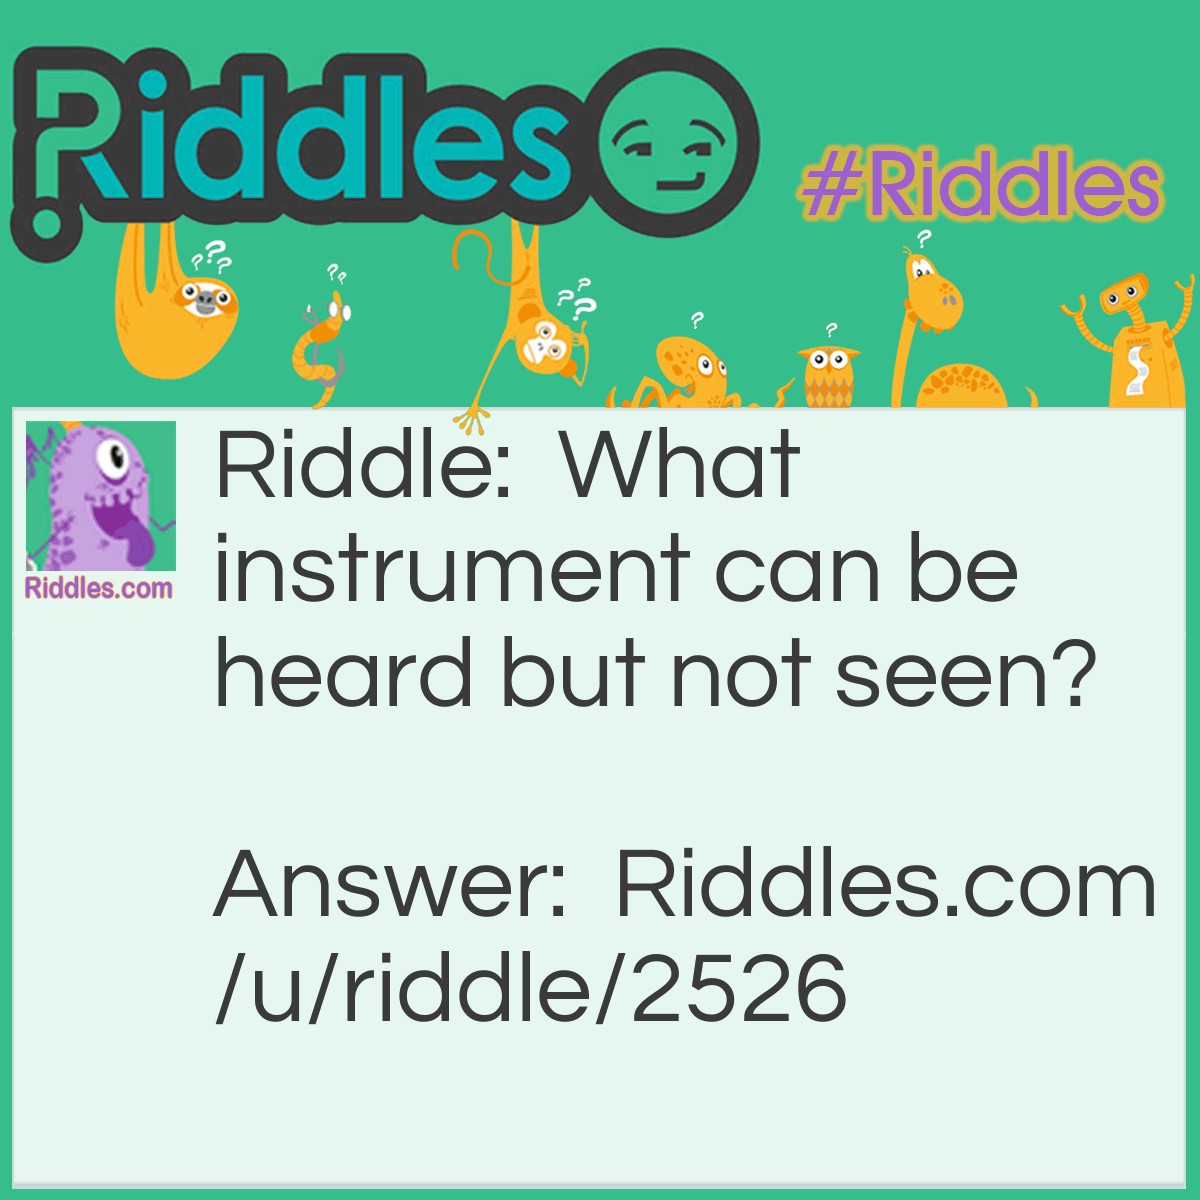 Riddle: What instrument can be heard but not seen? Answer: Your voice.